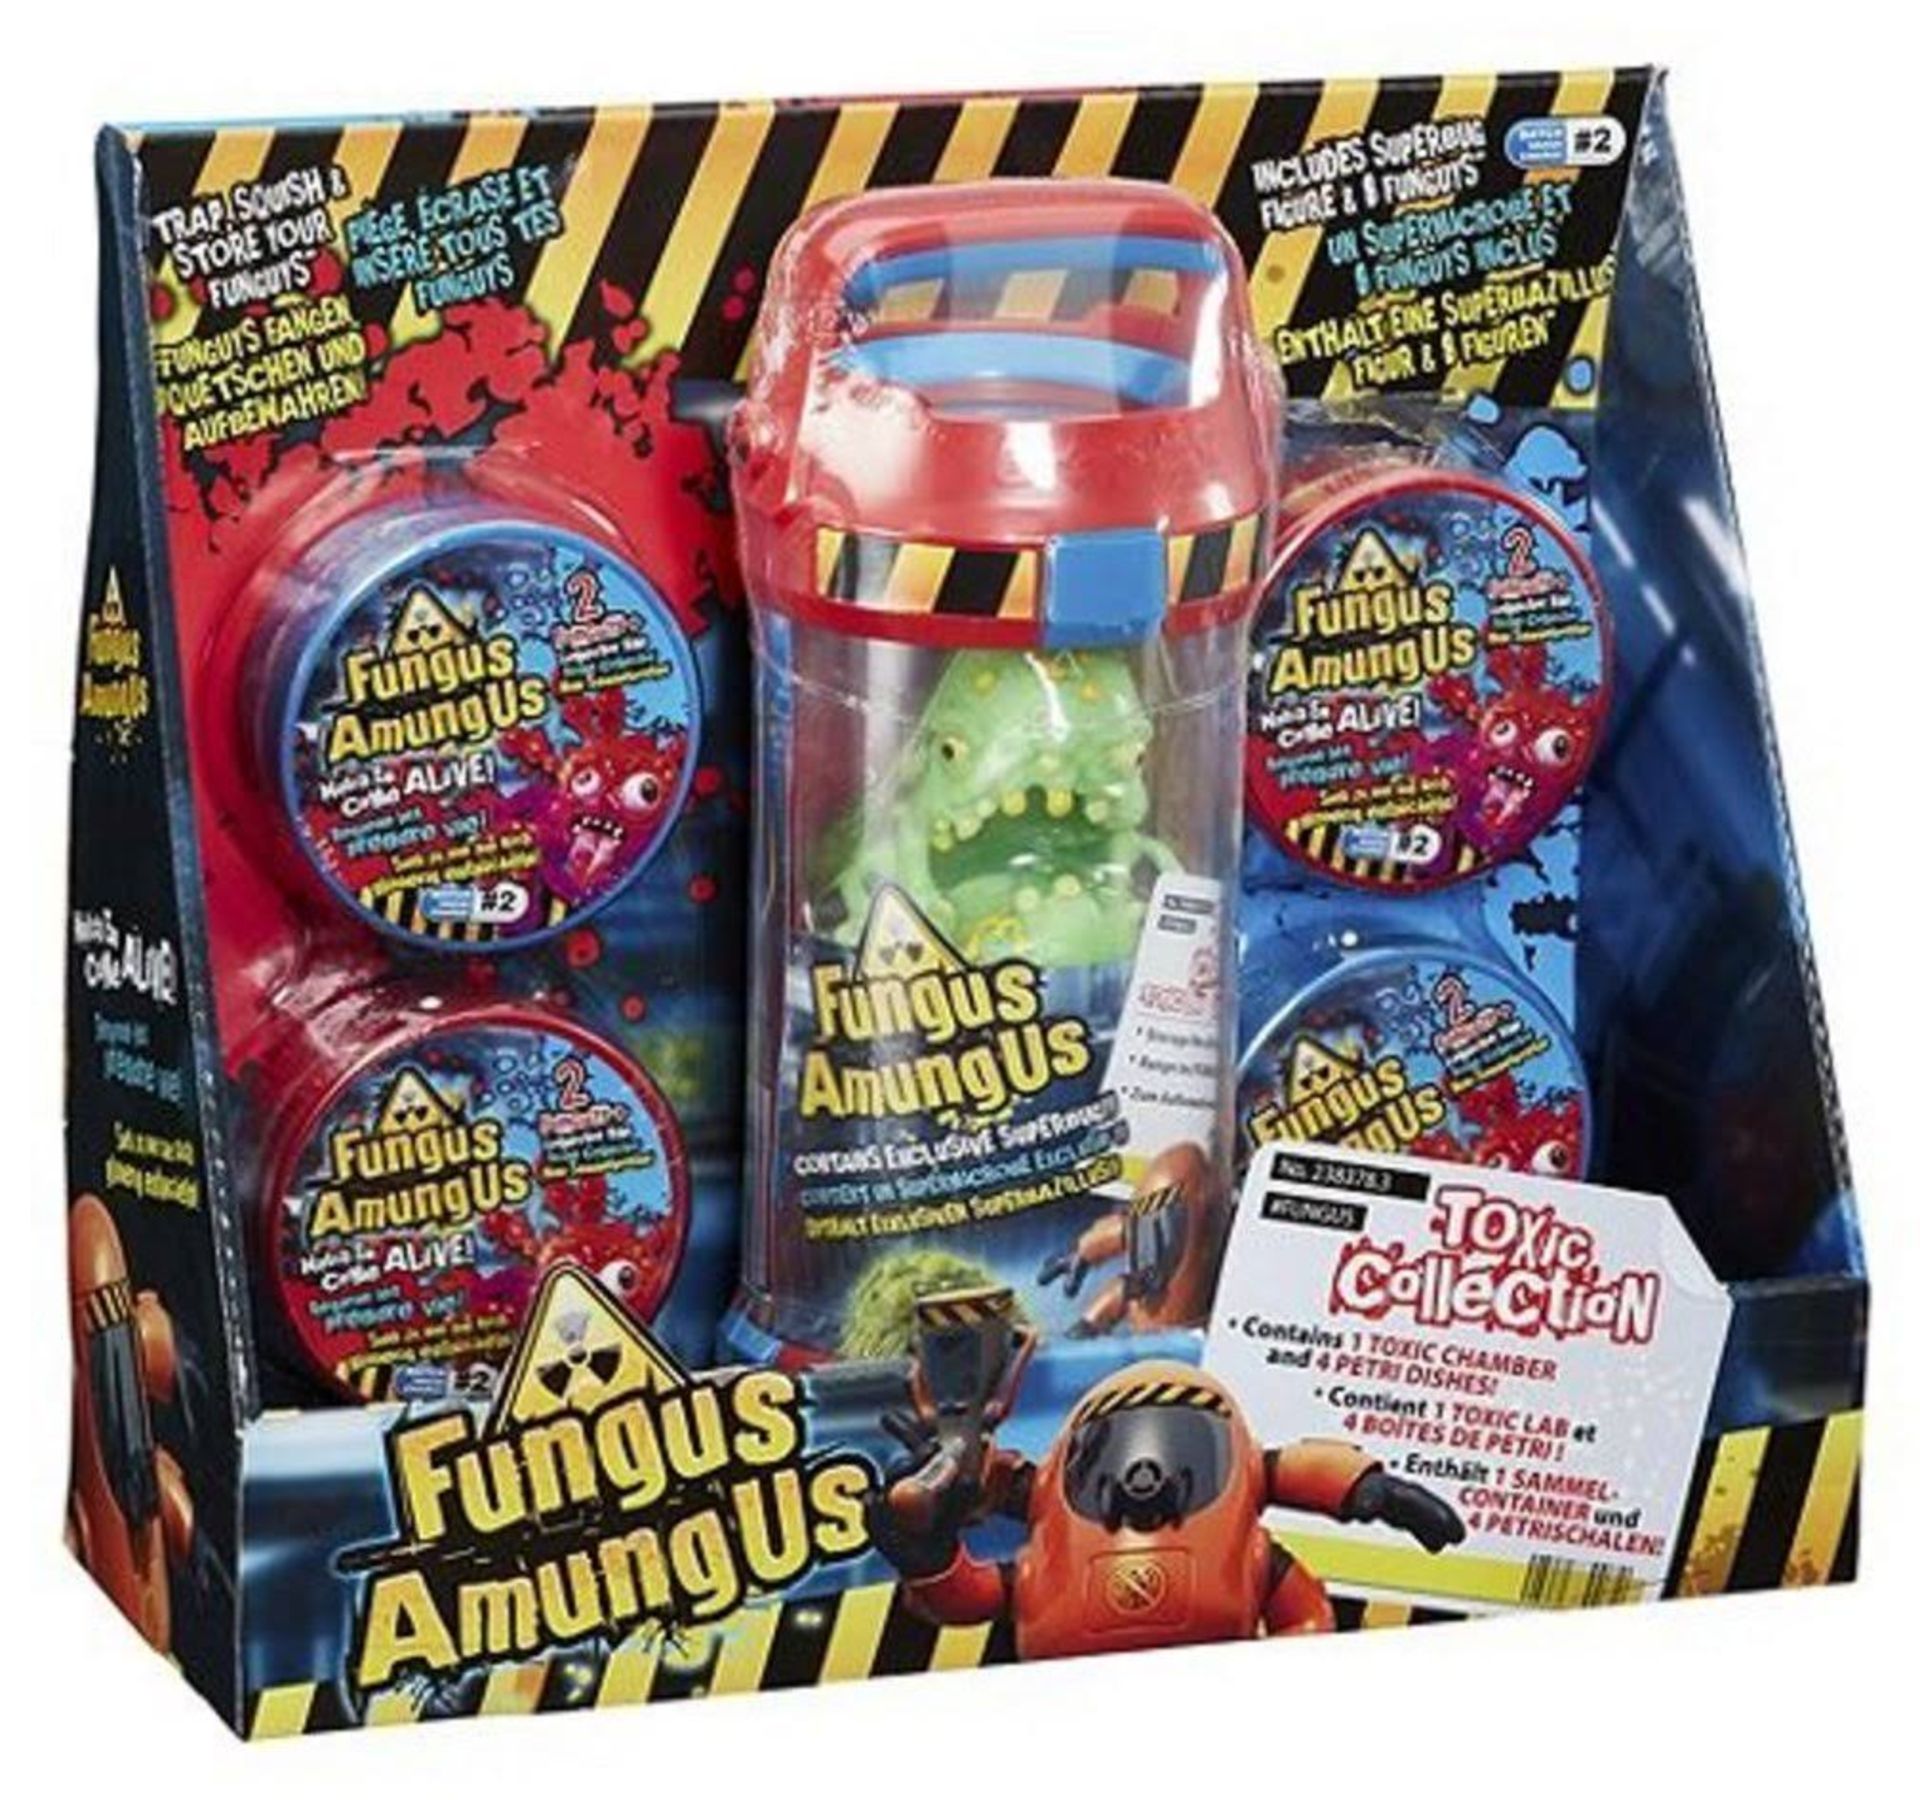 V *TRADE QTY* Brand New Fungus Amungus Toxic Collection ISP Up To £24.99 (Ebay) X 80 YOUR BID